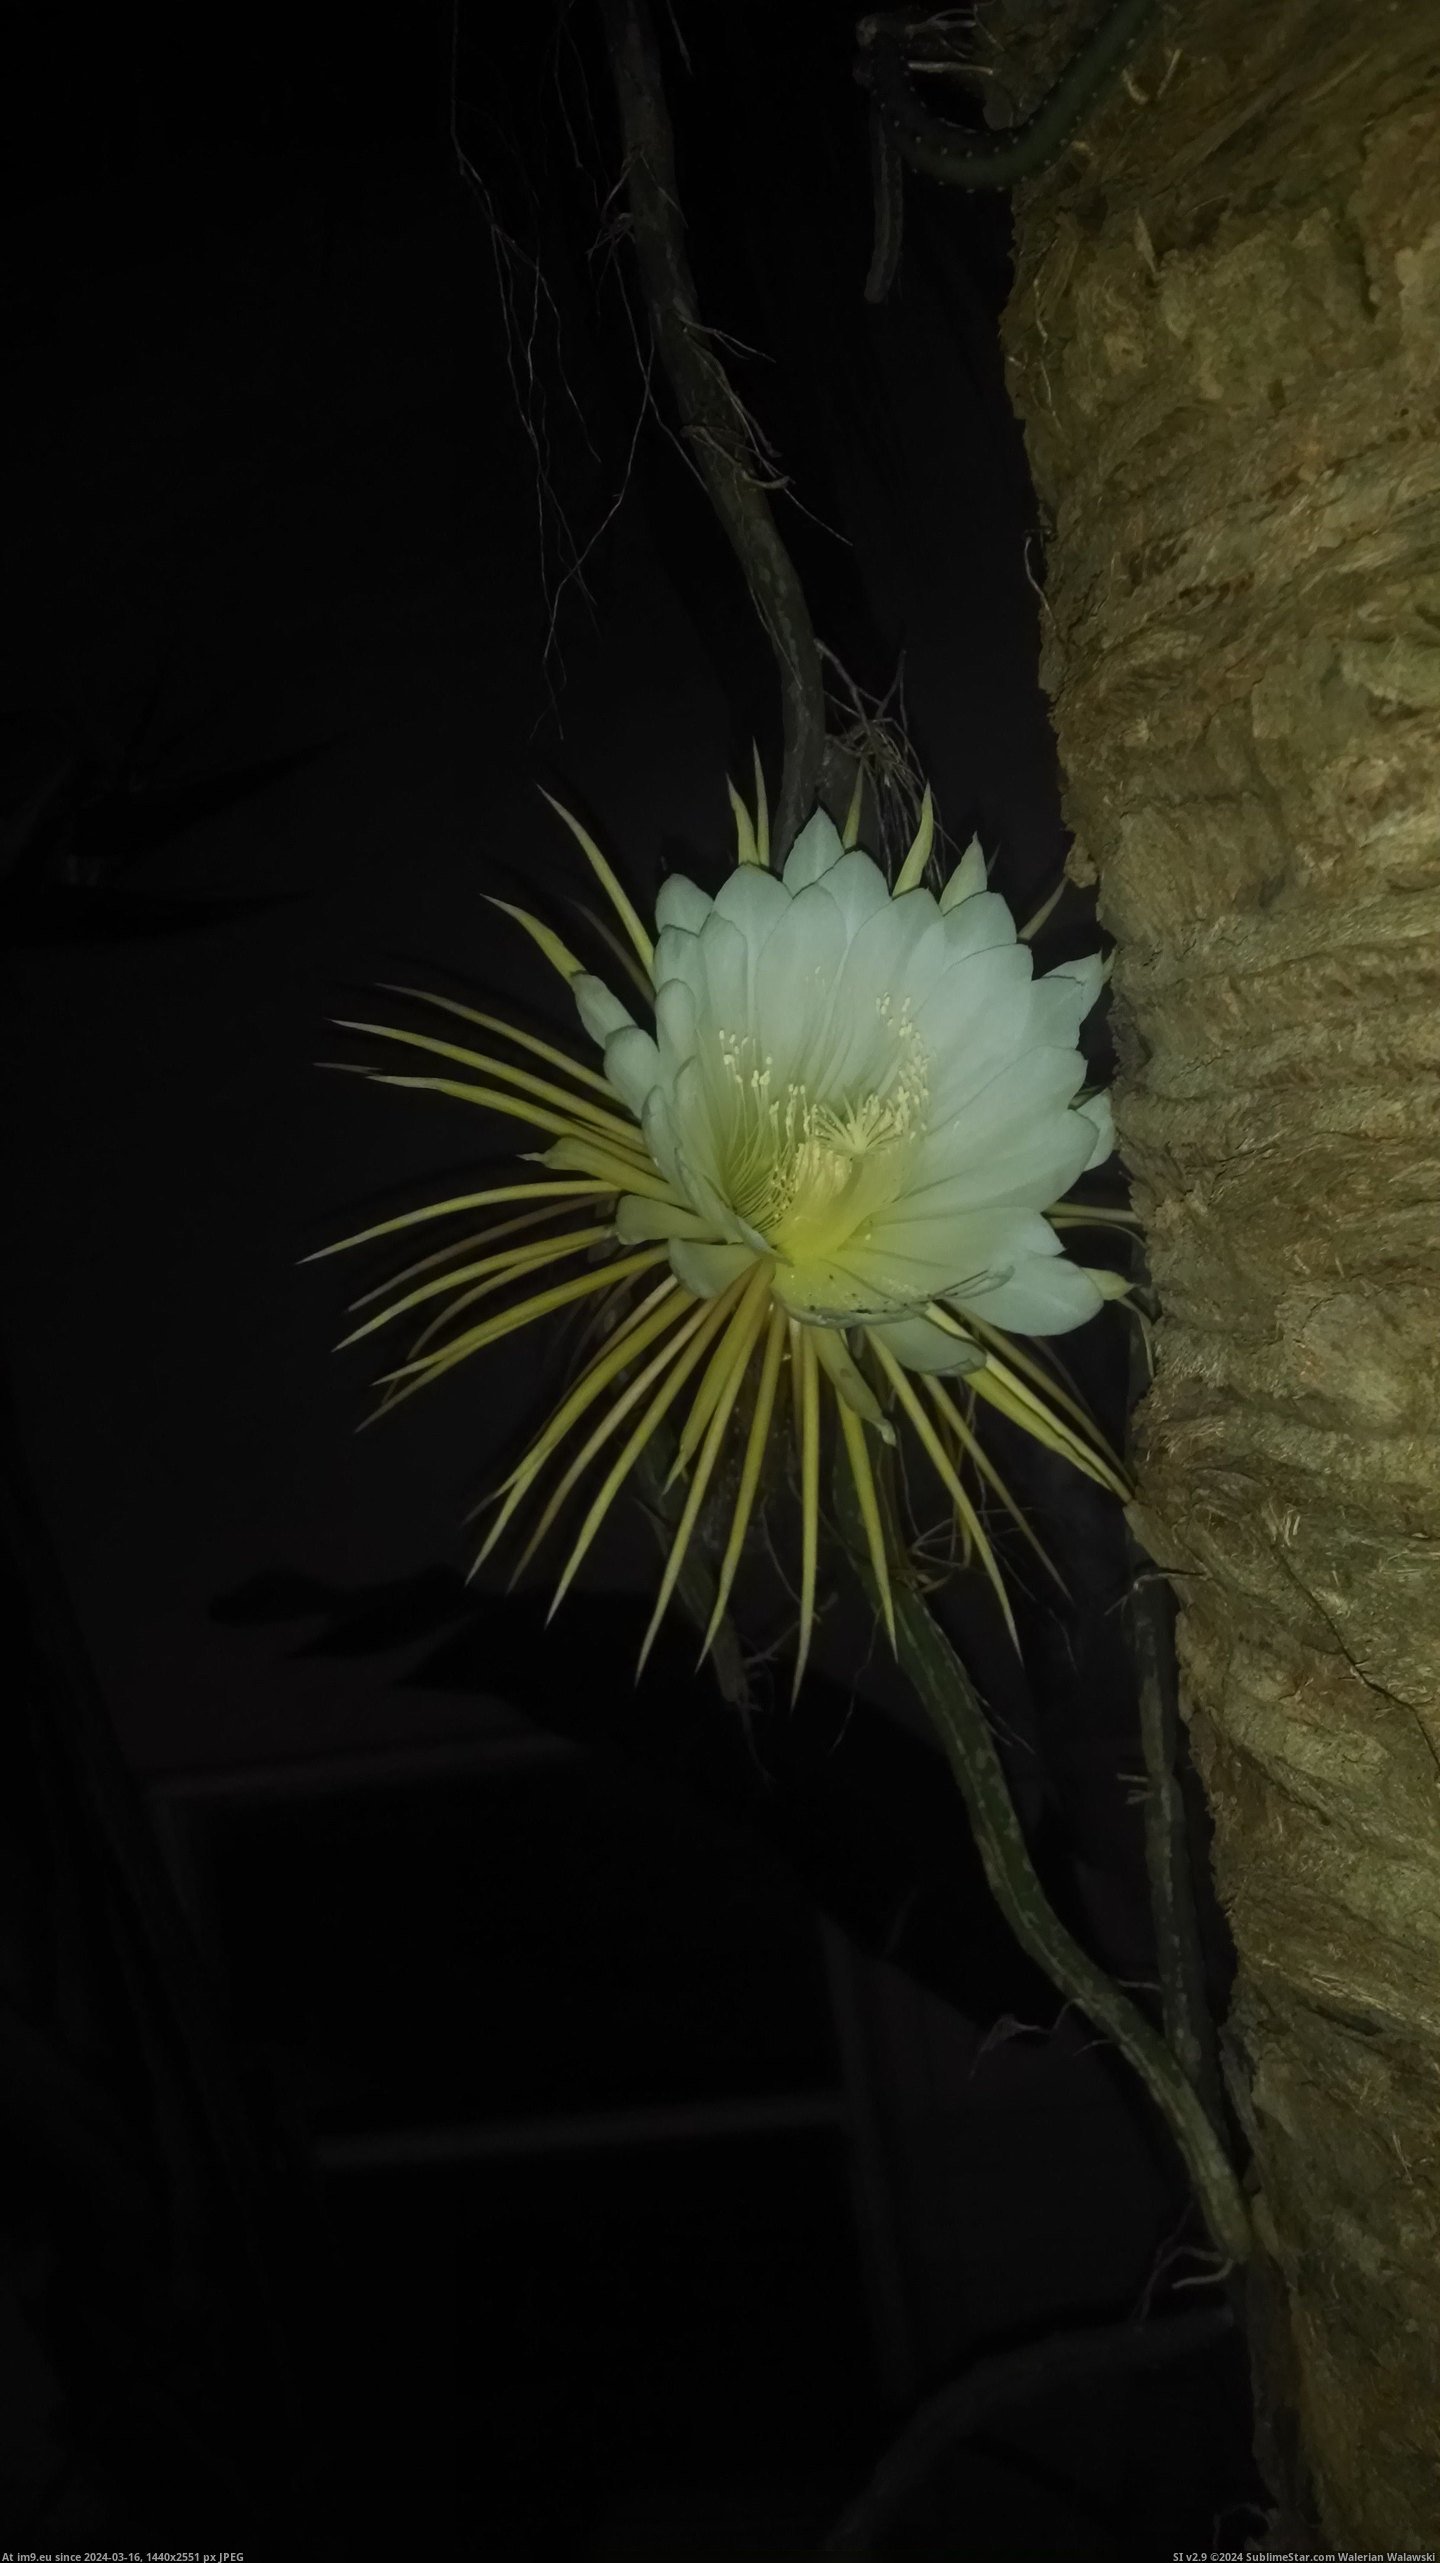 #Night #Tree #Front #Palm #Cactus #Hangs #Bloomed #Saw #Yard #Walked [Pics] I have a cactus that hangs from a palm tree in my front yard. Last night I walked outside and saw it had bloomed. Only ha Pic. (Image of album My r/PICS favs))